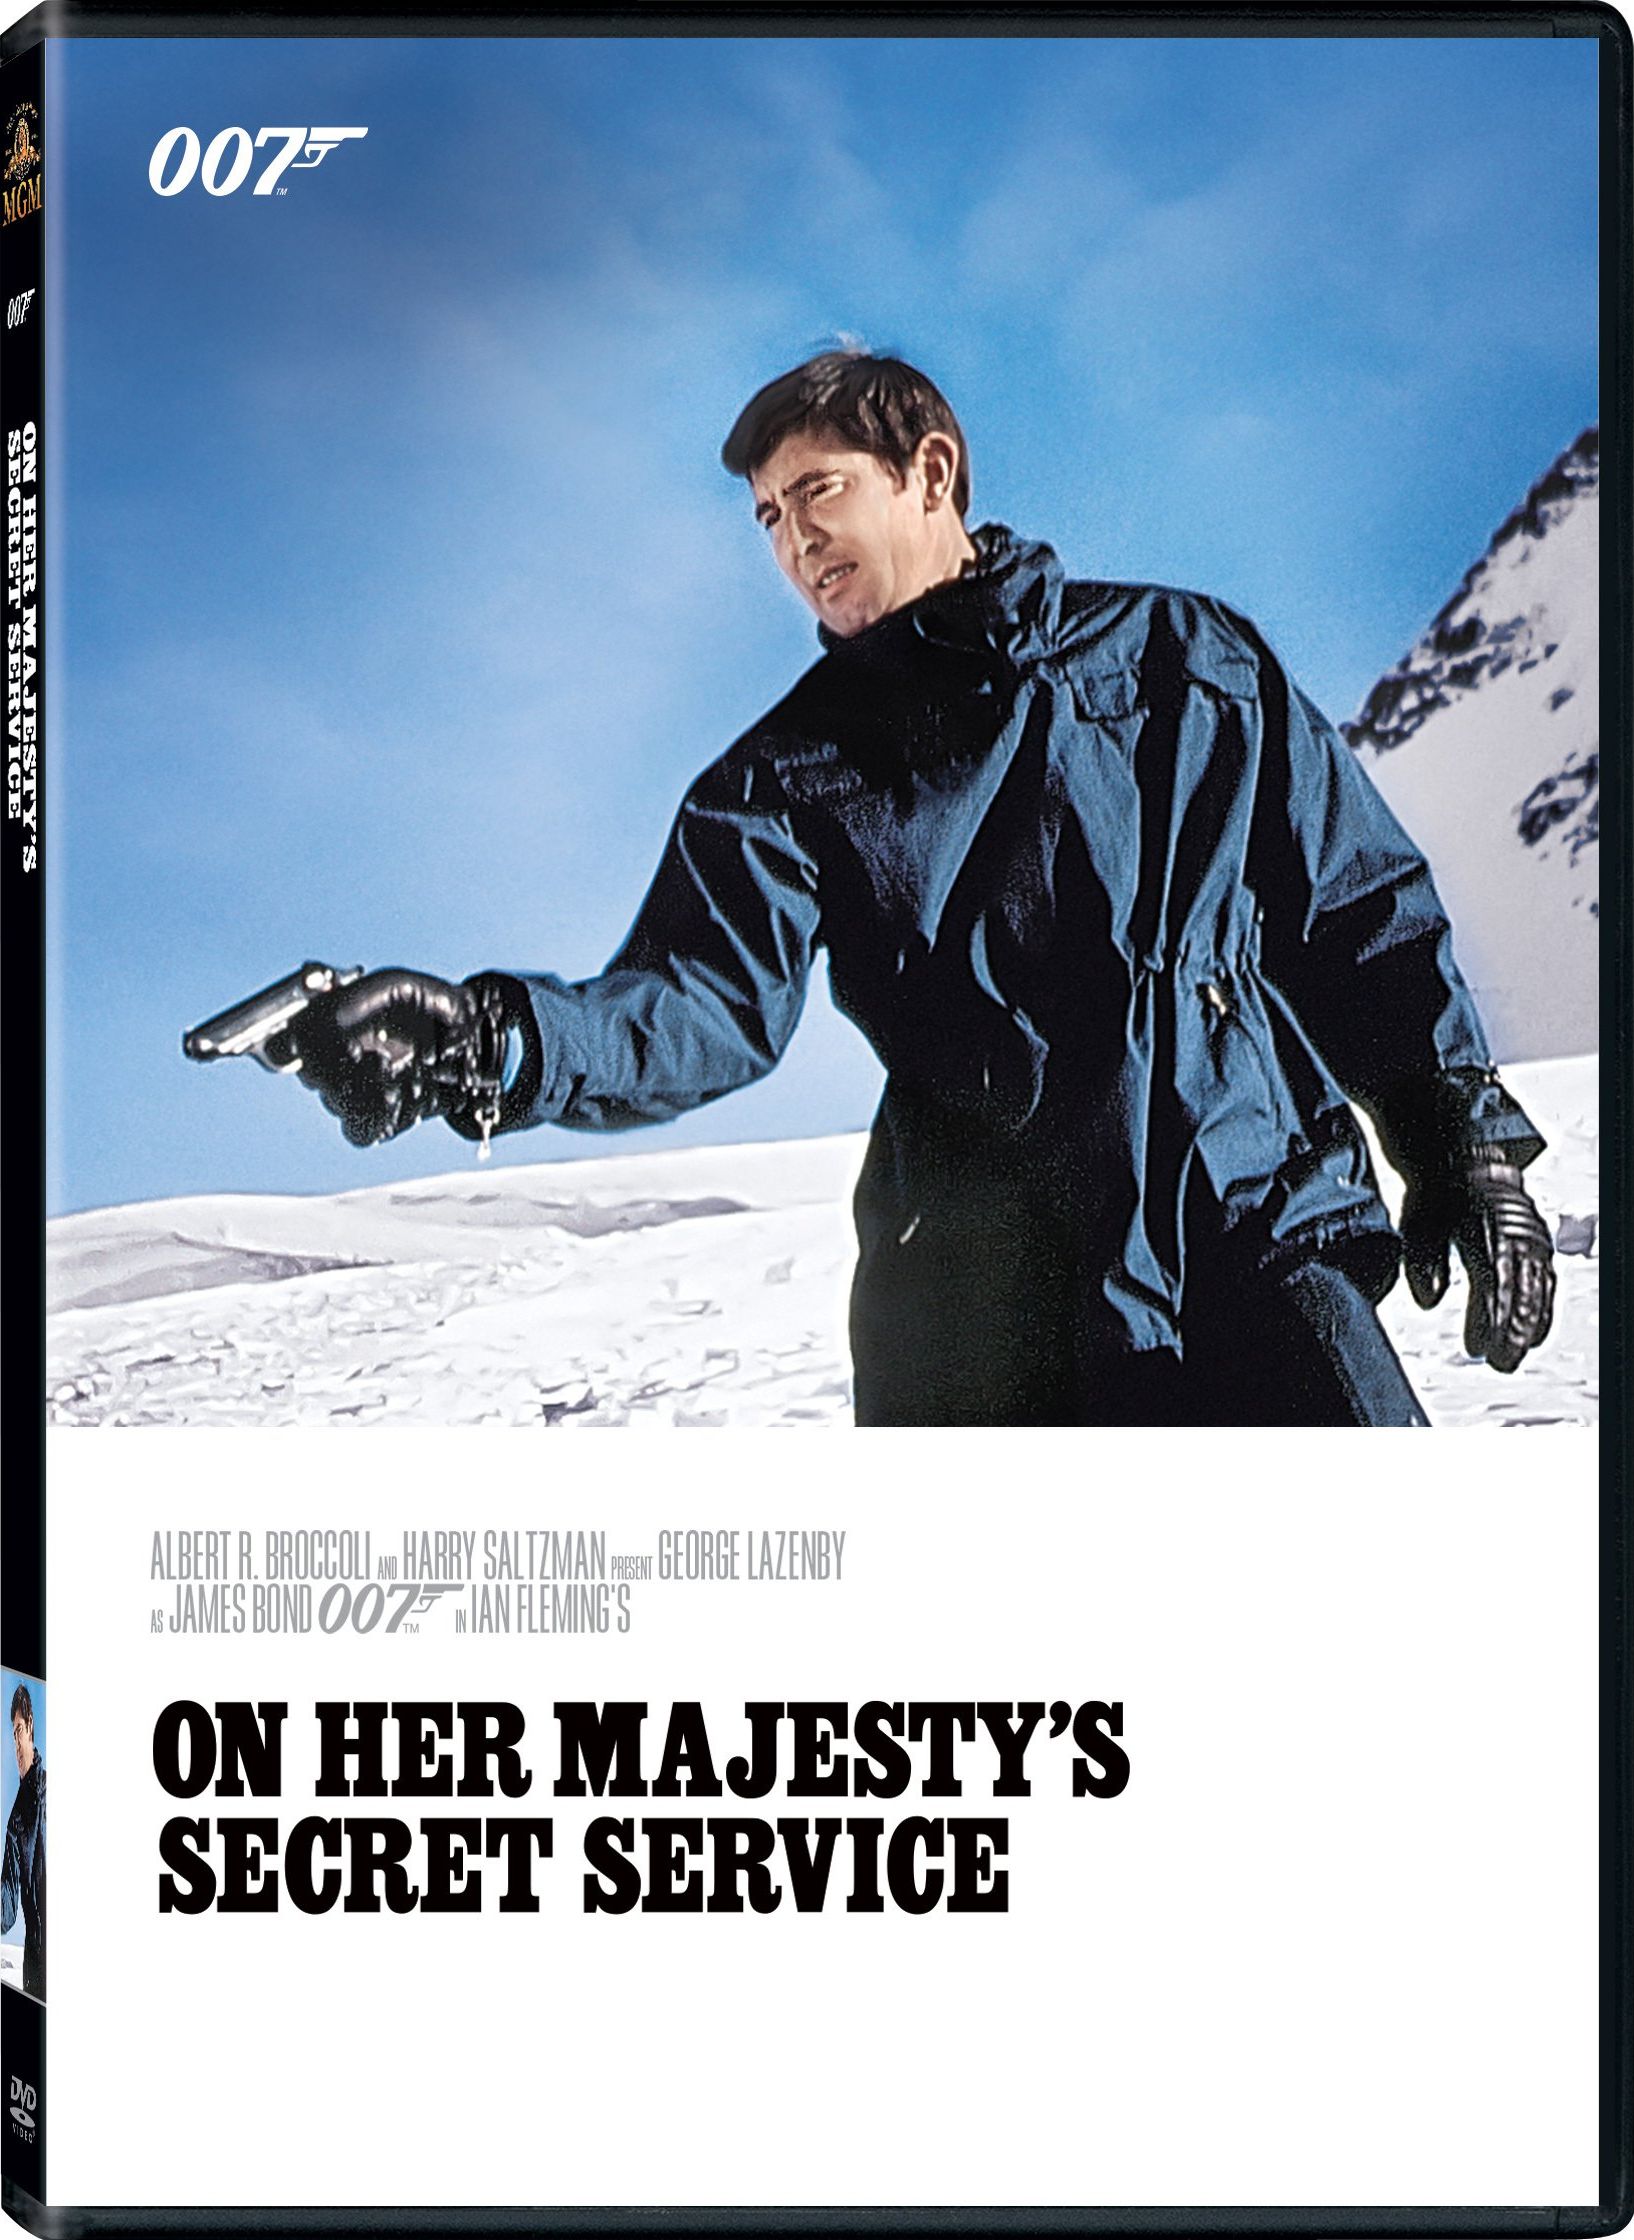 On Her Majesty's Secret Service Backgrounds, Compatible - PC, Mobile, Gadgets| 1634x2240 px